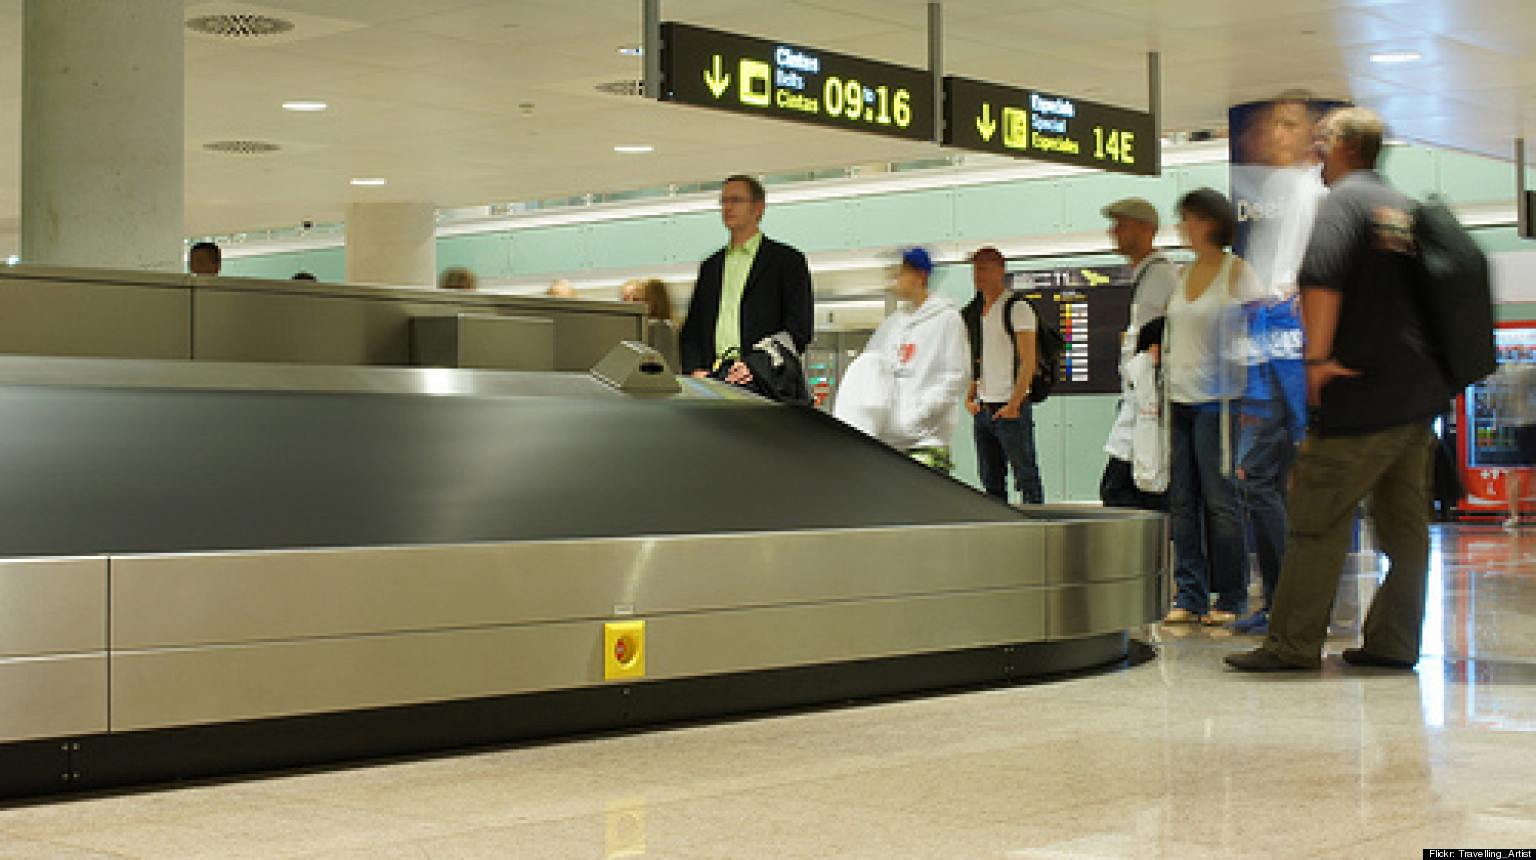 7 Ways To Prevent Lost Luggage | HuffPost